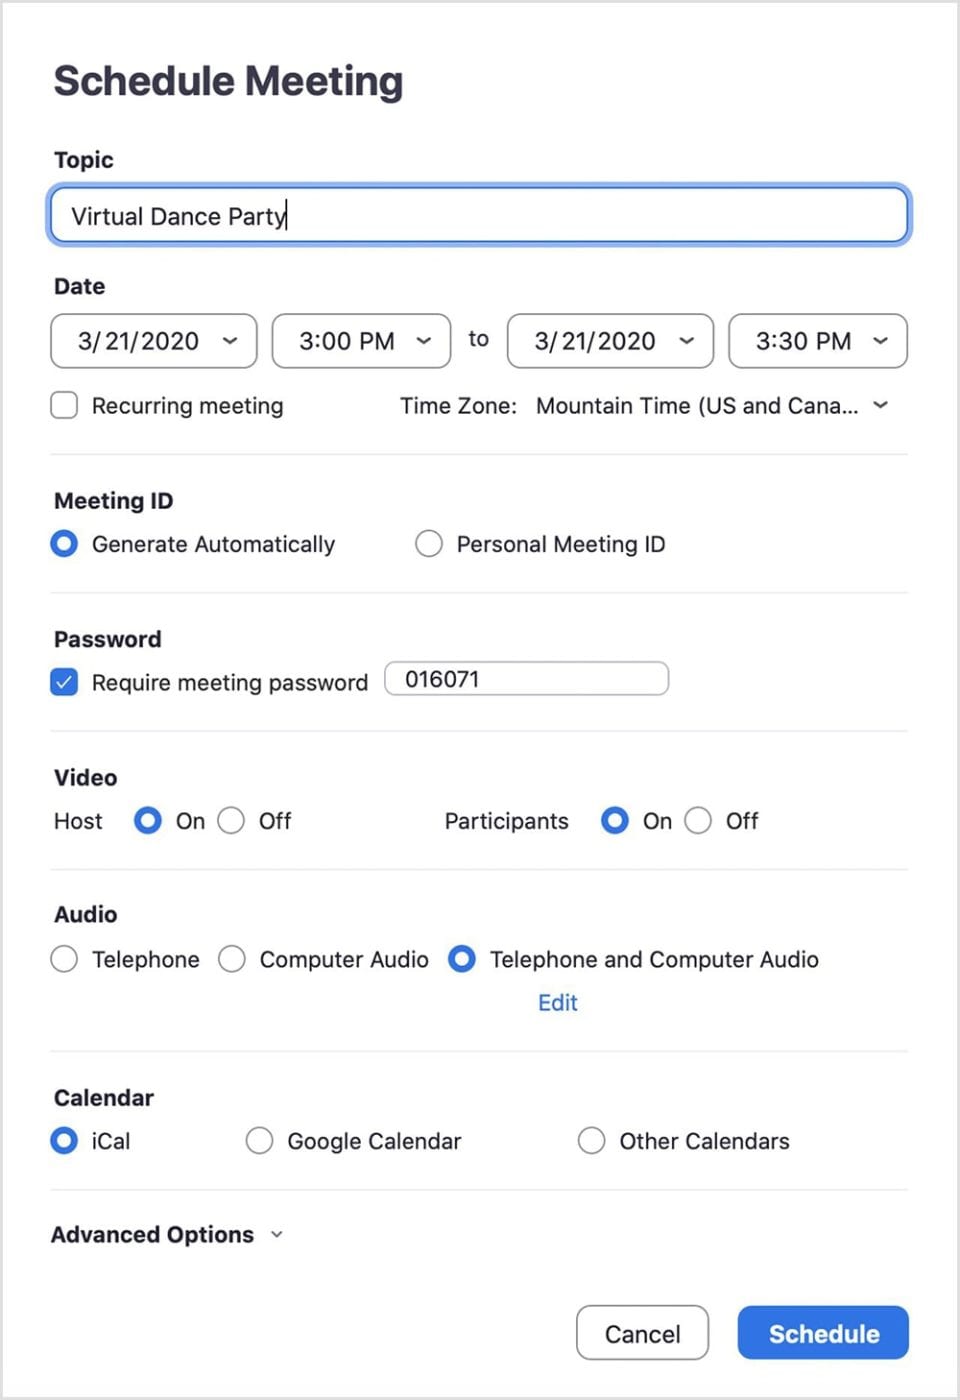 Scheduling a Zoom meeting from the Mac client